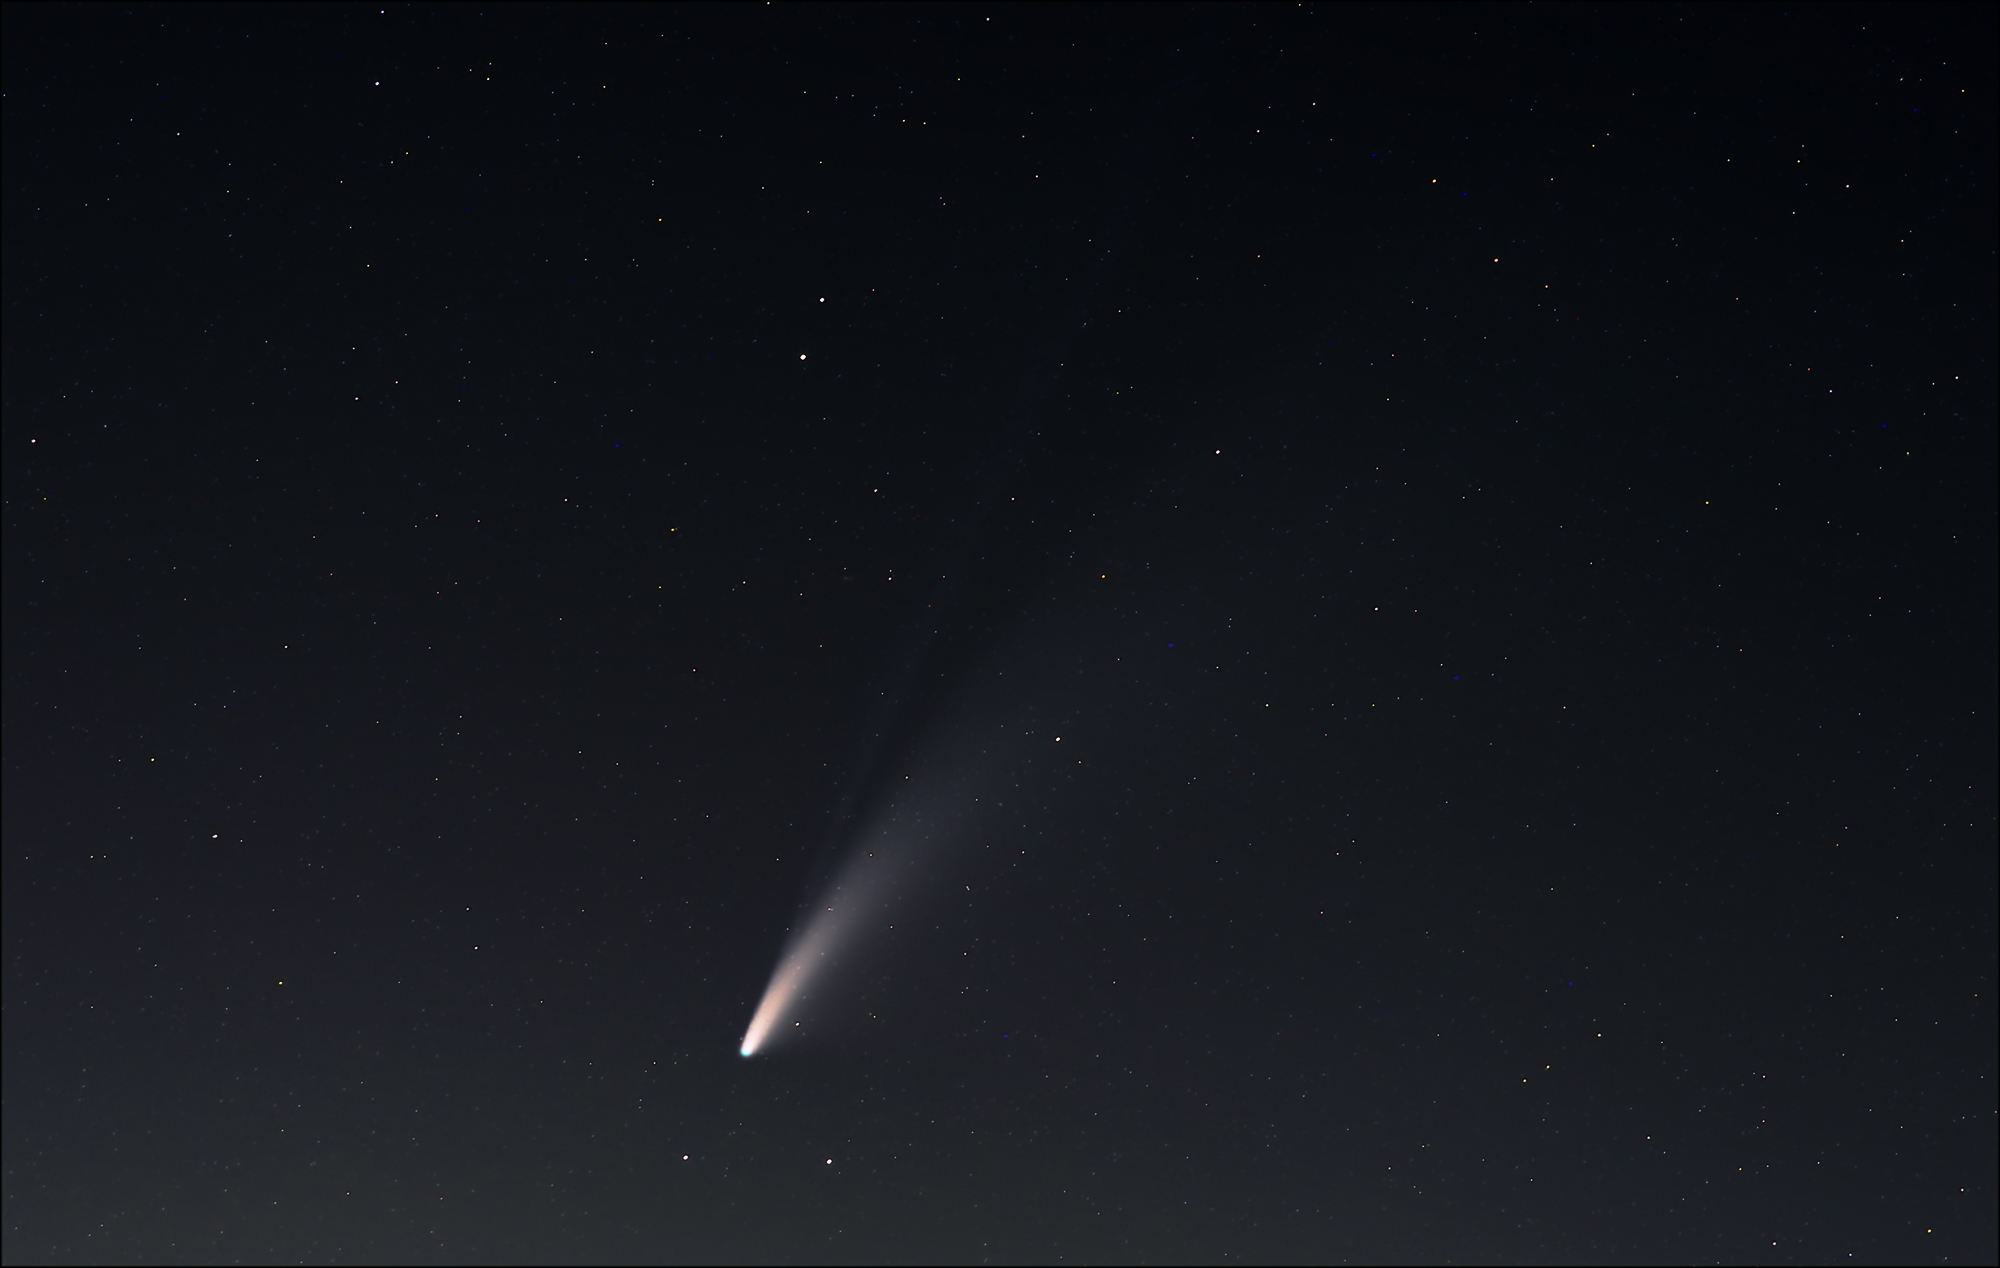 Comet Neowise on 7/18/20